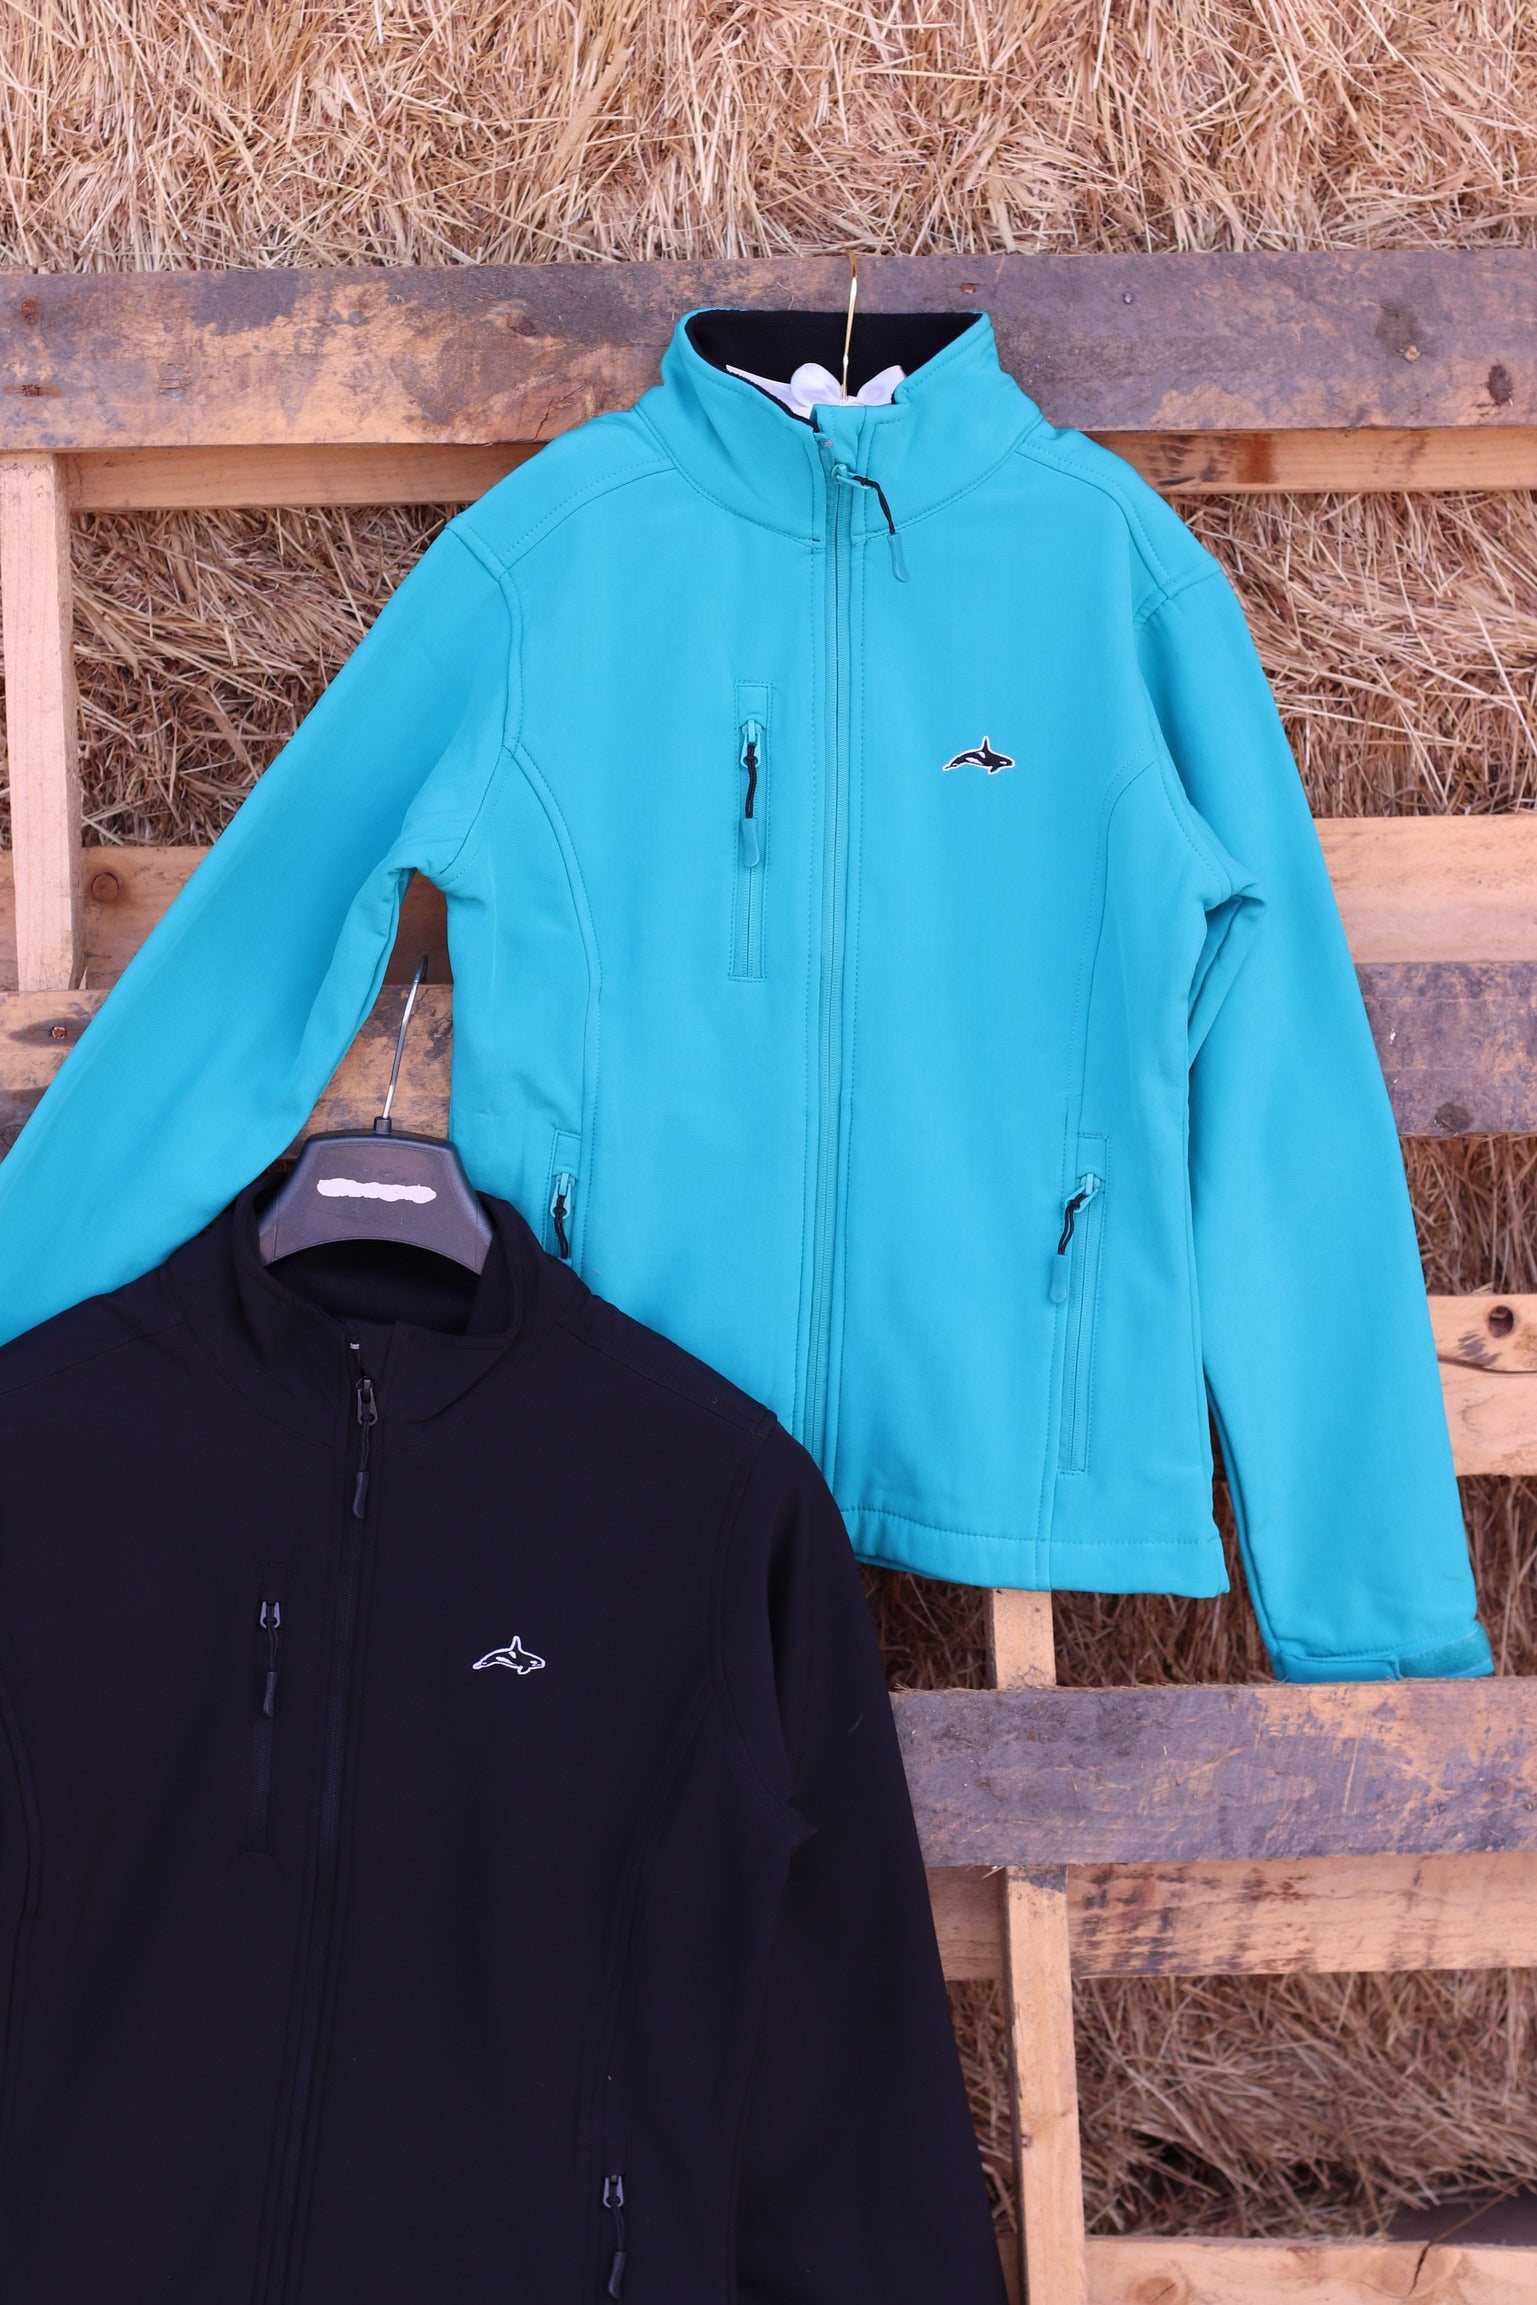 10 Reasons to Invest in a Softshell Jacket